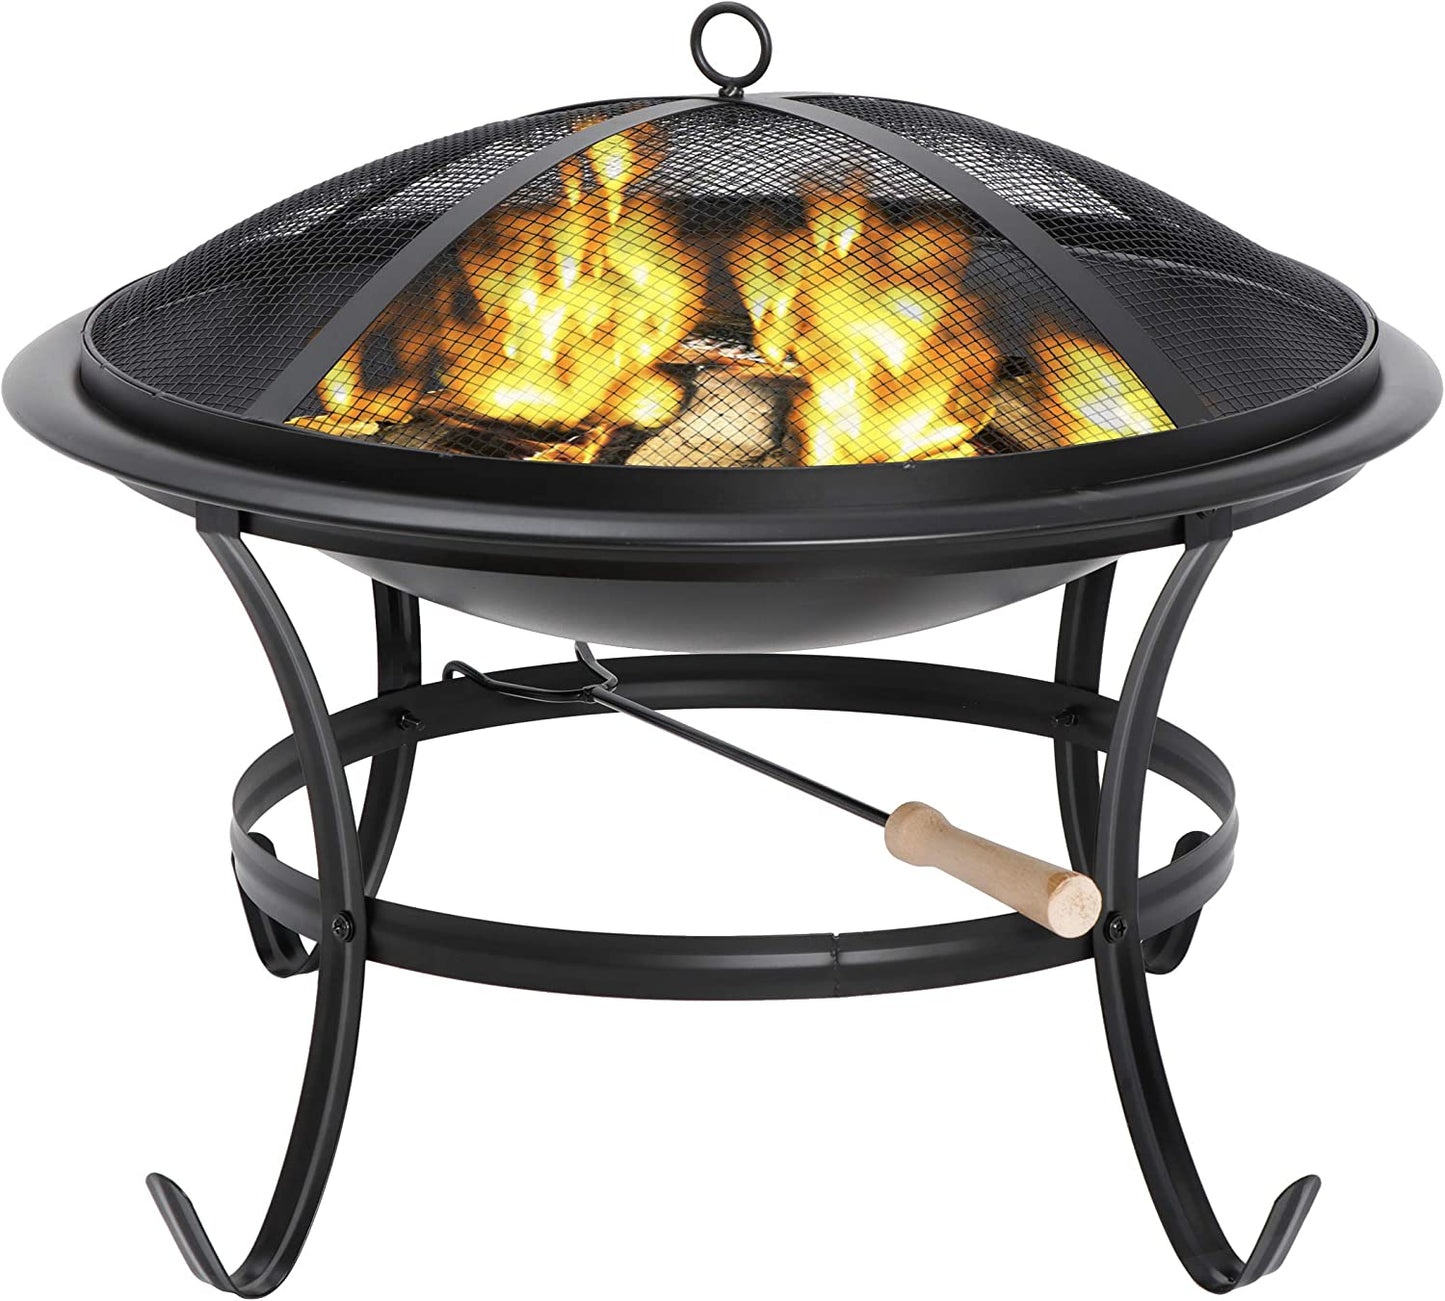 Fire Pit 22’’ Outdoor Fire Pits Wood Burning Patio Fire Bowl Firepit with BBQ Grill, Spark Screen and Fire Poker for Backyard Outside Camping Picnic Bonfires